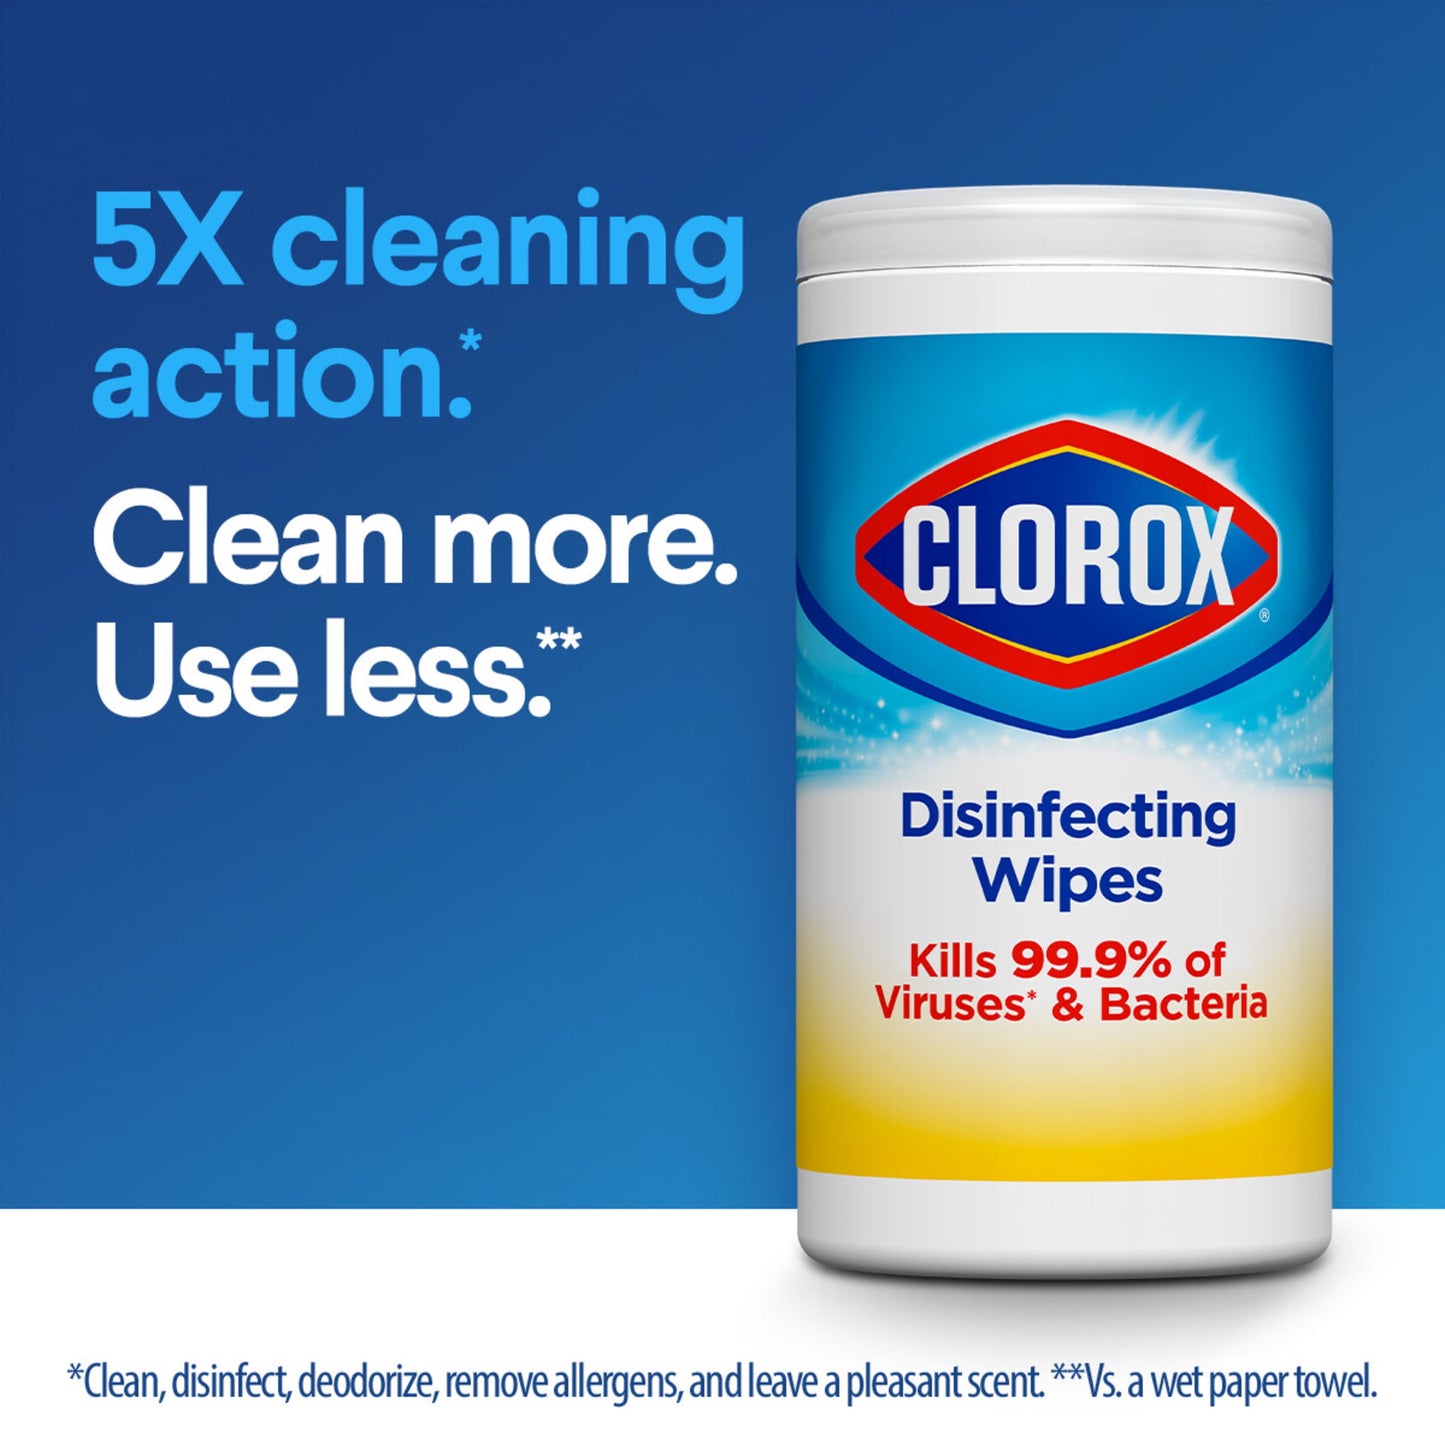 Clorox Bleach-Free Disinfecting and Cleaning Wipes, Fresh Scent, 75 Count